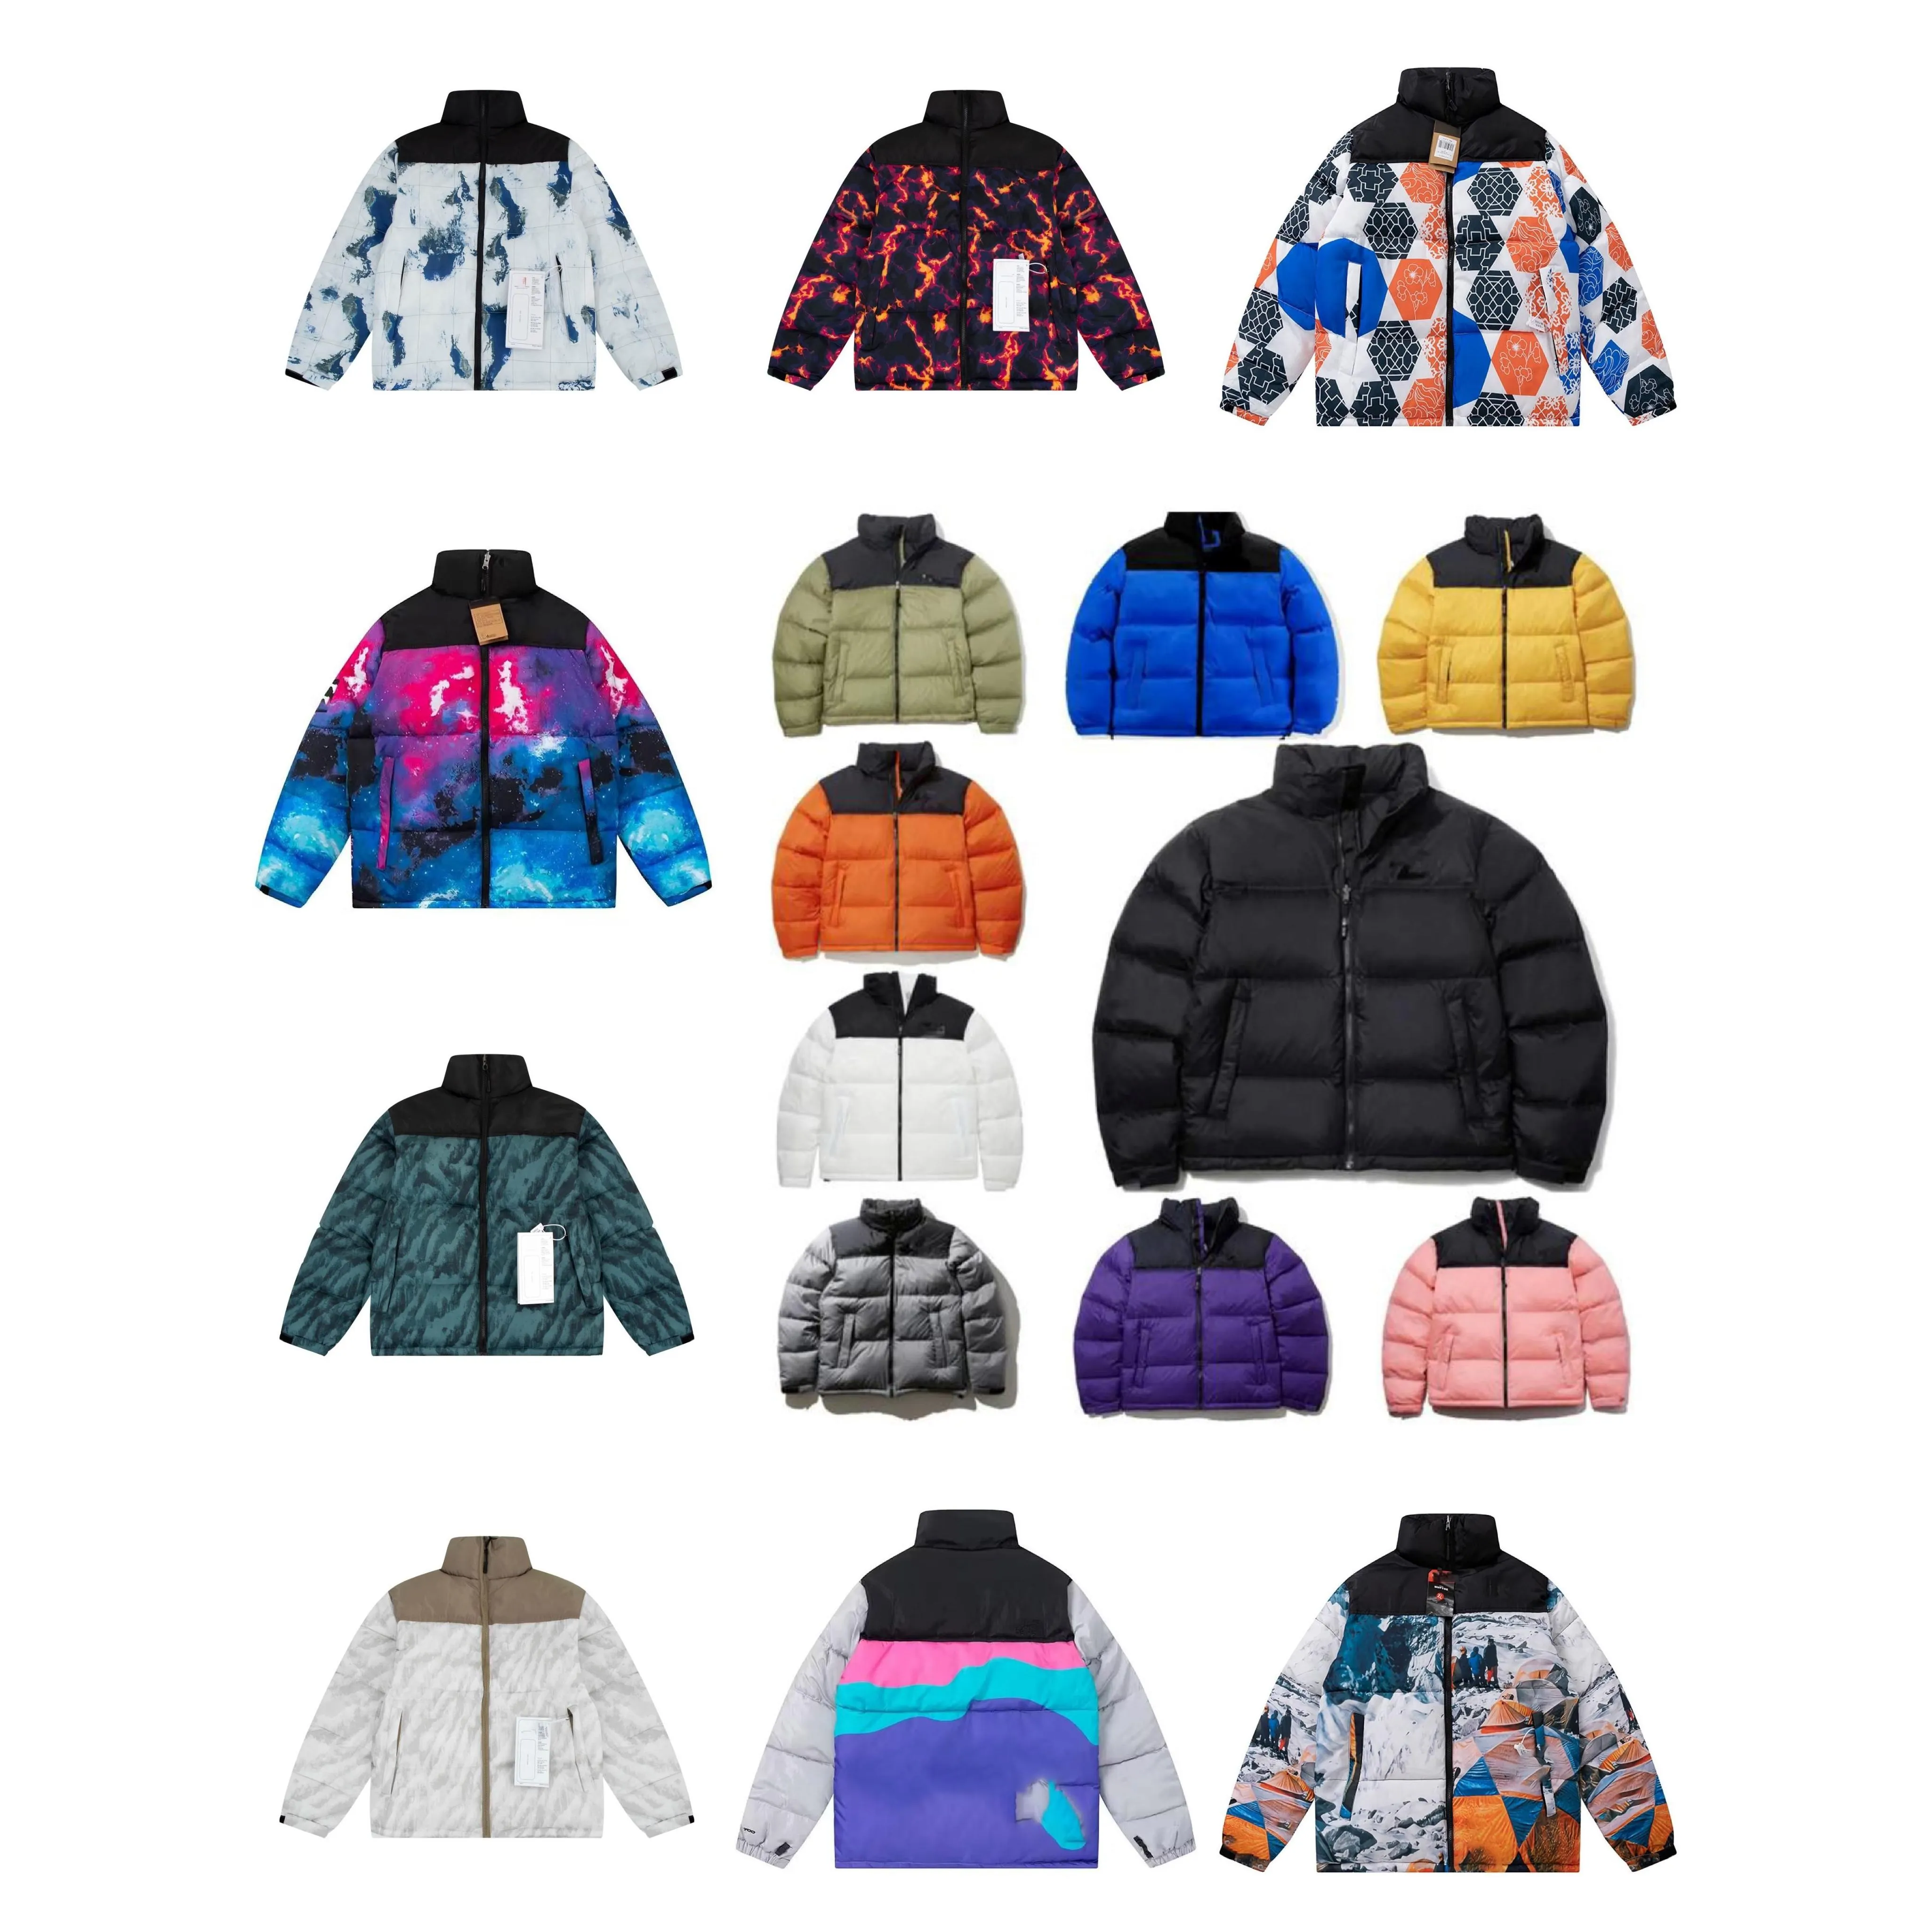 Men Winter Jacket Women Down Hoodie Embroidery Down Jacket North Warm Parka Coat Face Men Puffer Jackets Letter Print Outwear Multiple Color printing